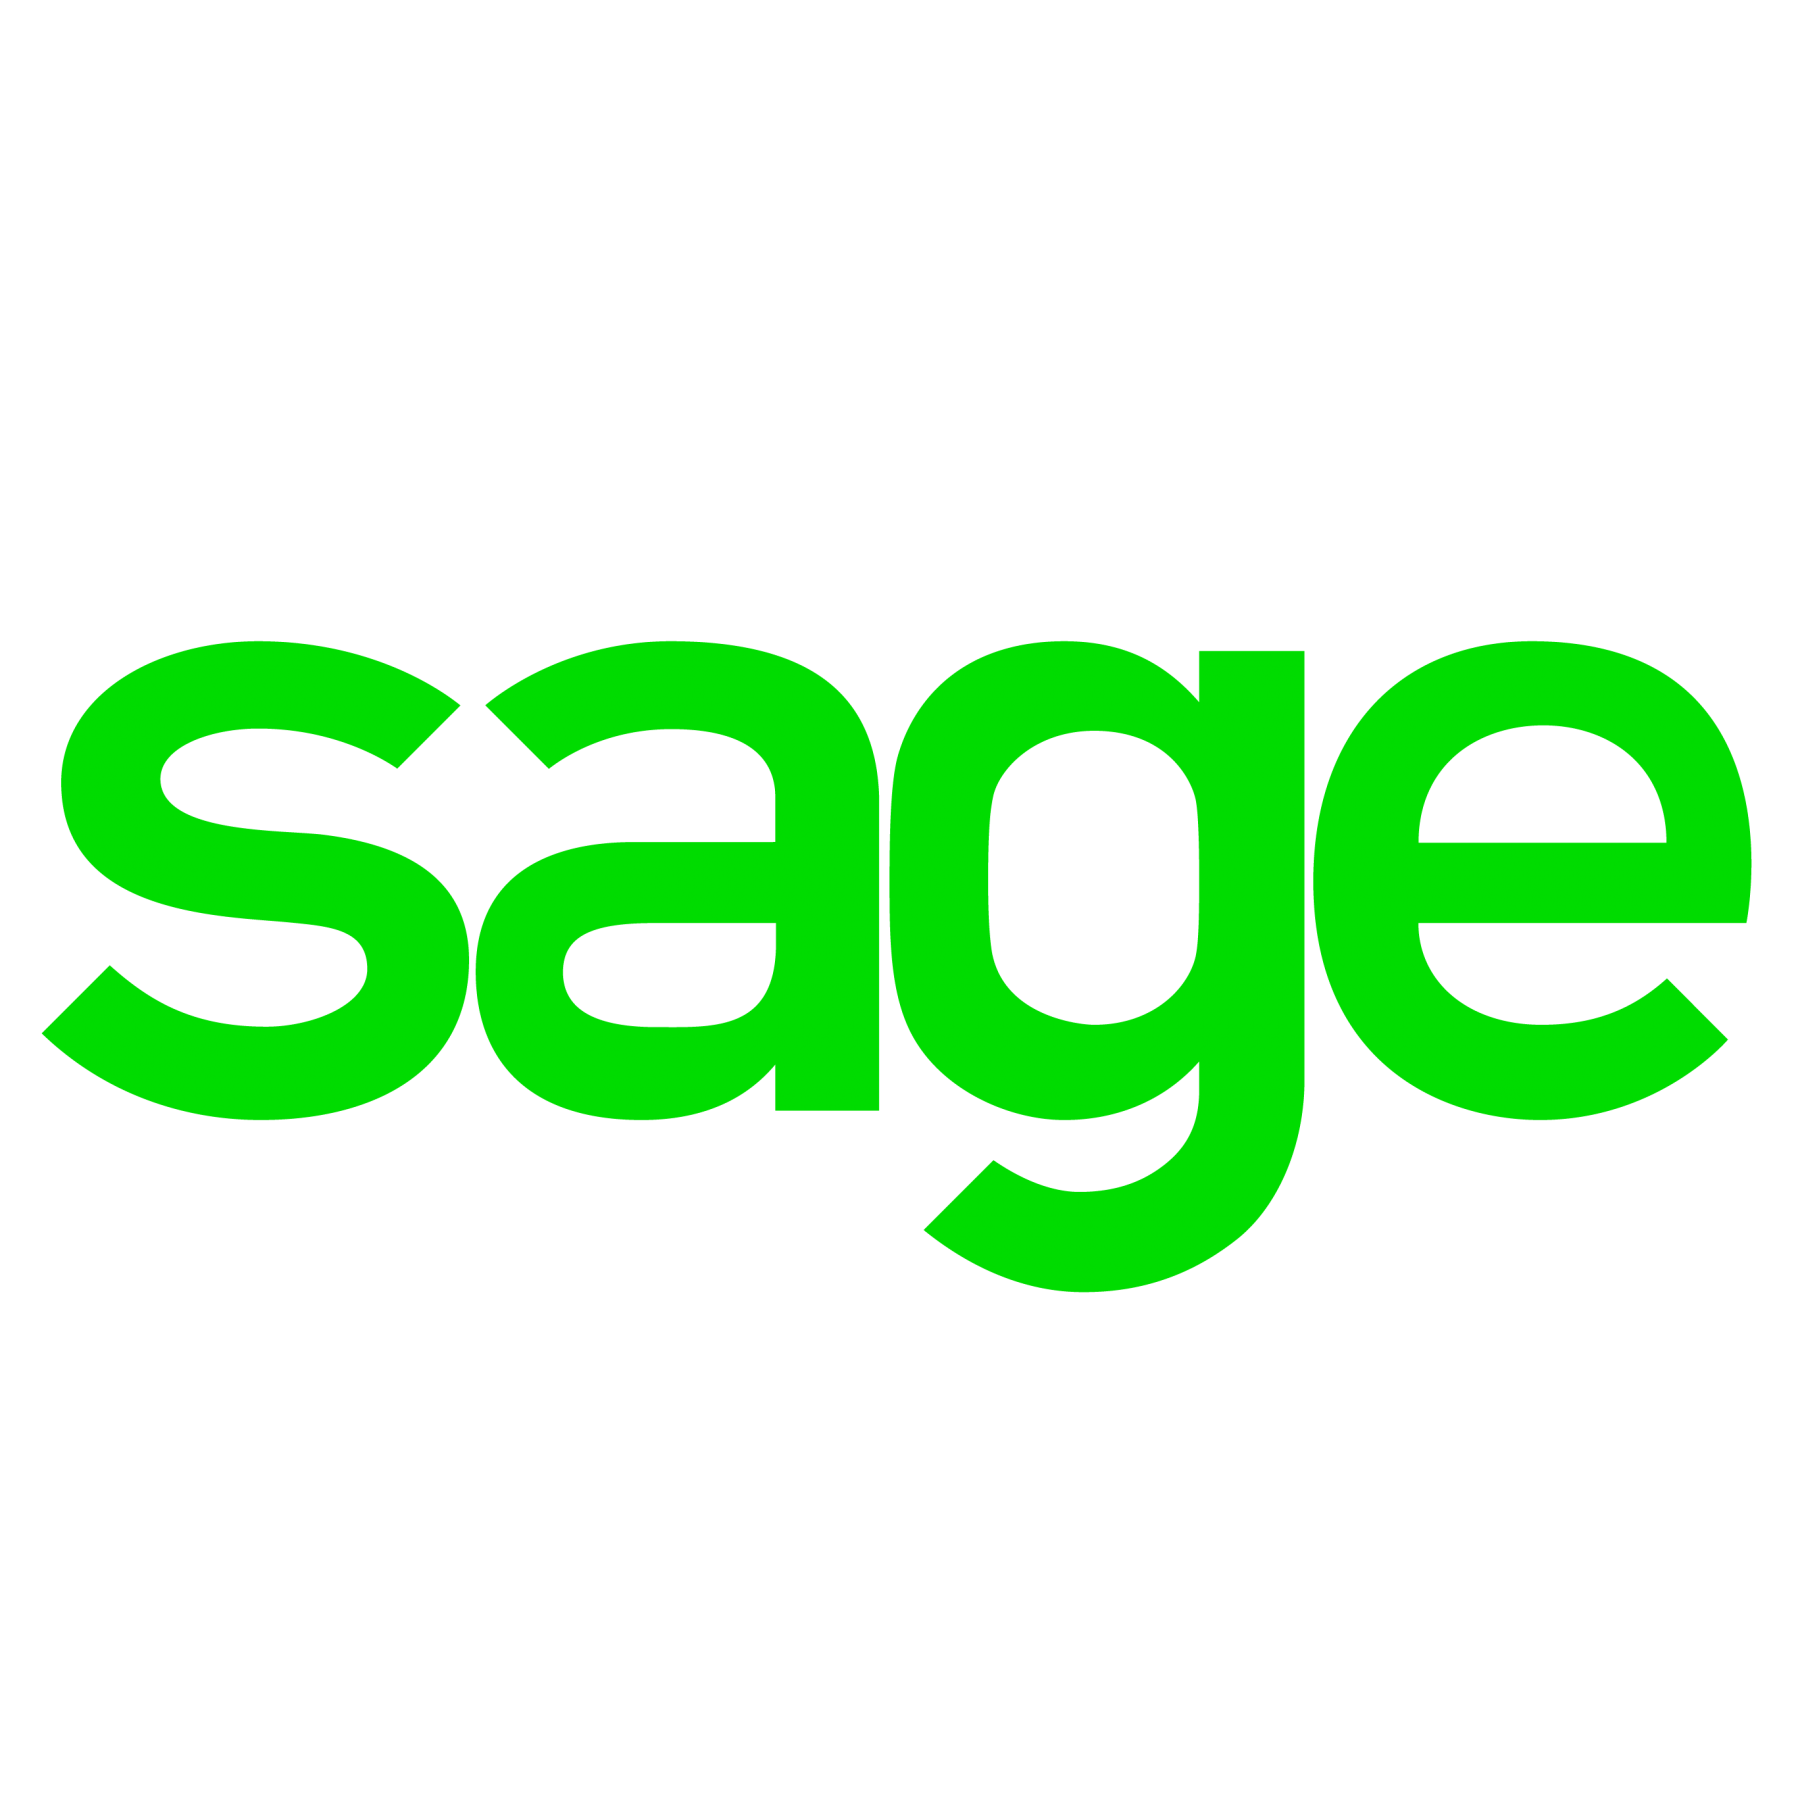 
https://www.rixxo.com/wp-content/uploads/2017/06/Sage-one.png
